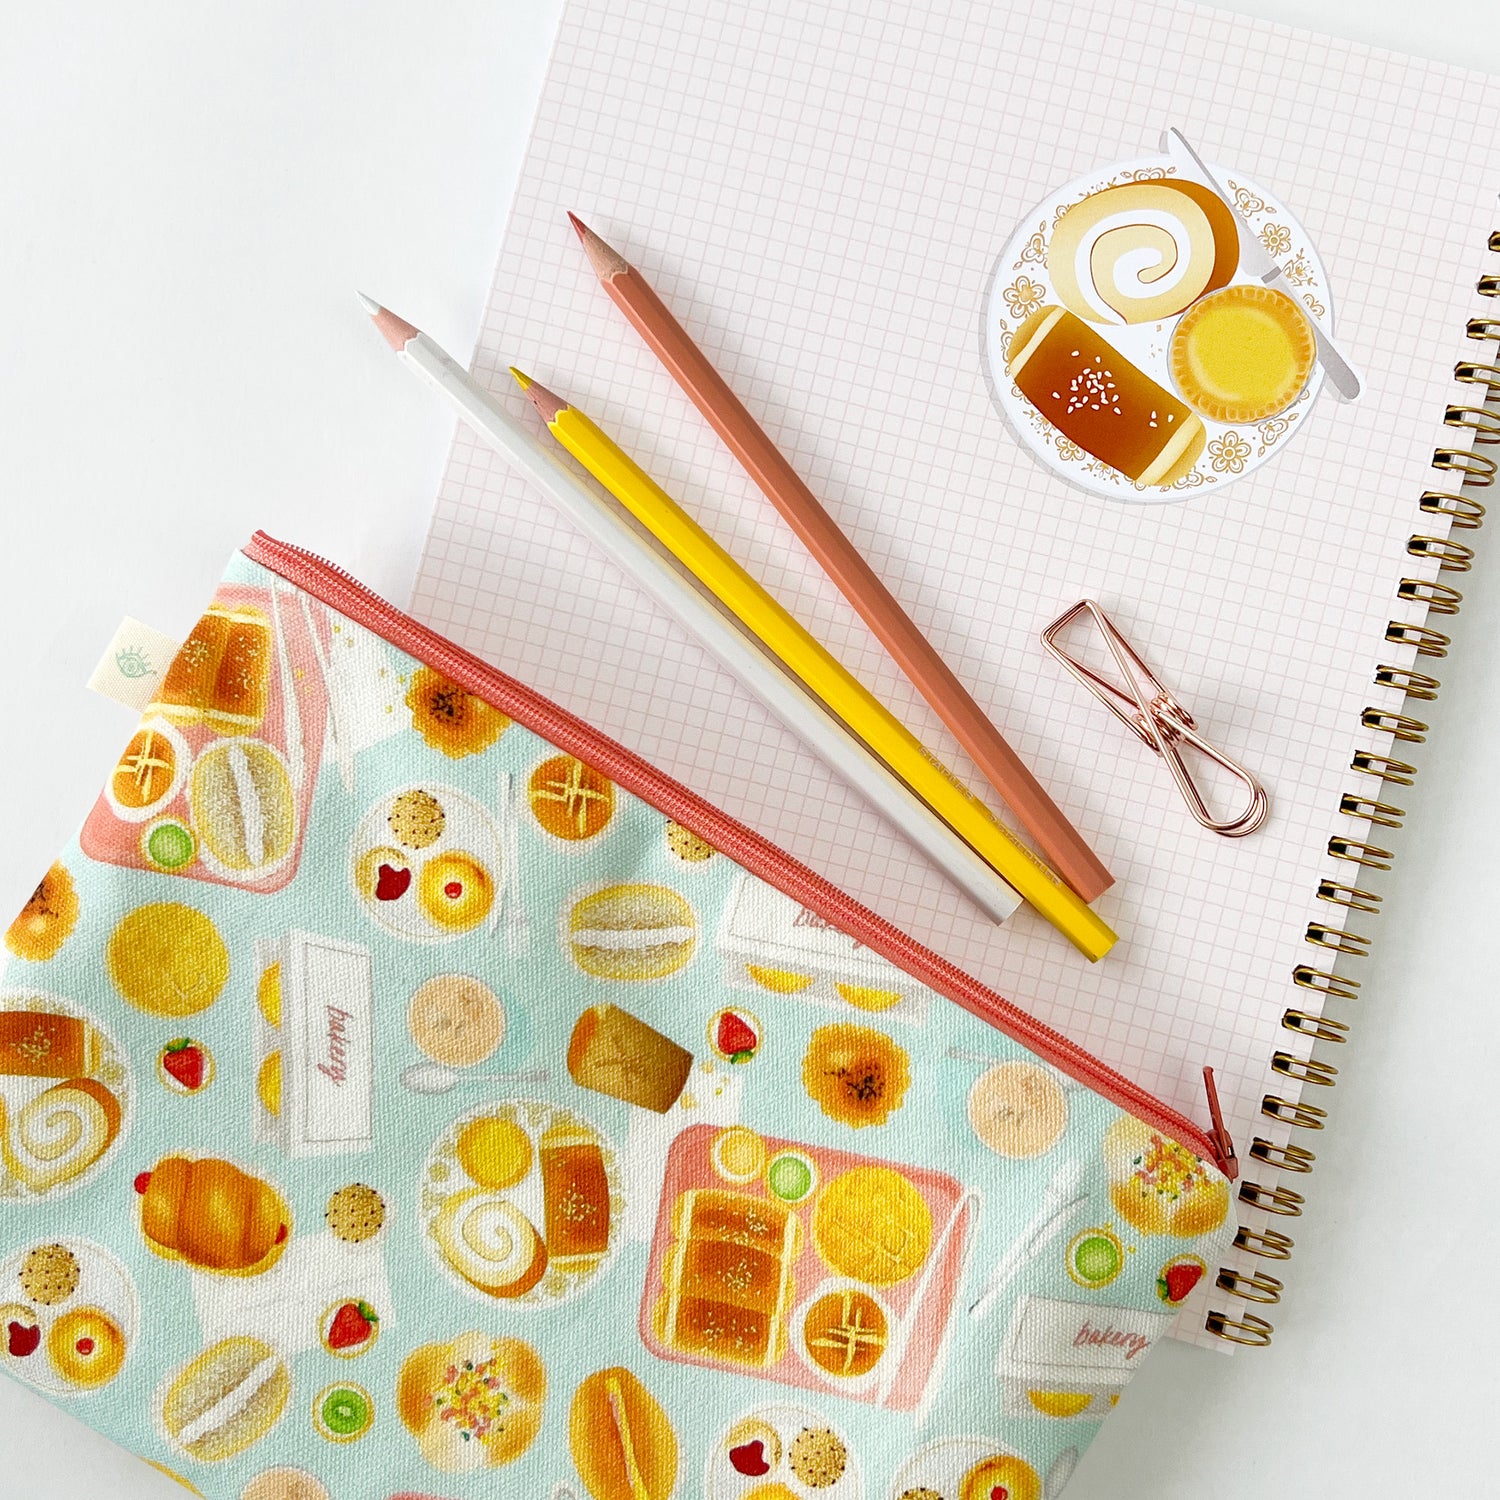 Chinese bakery zipper pouch by I&